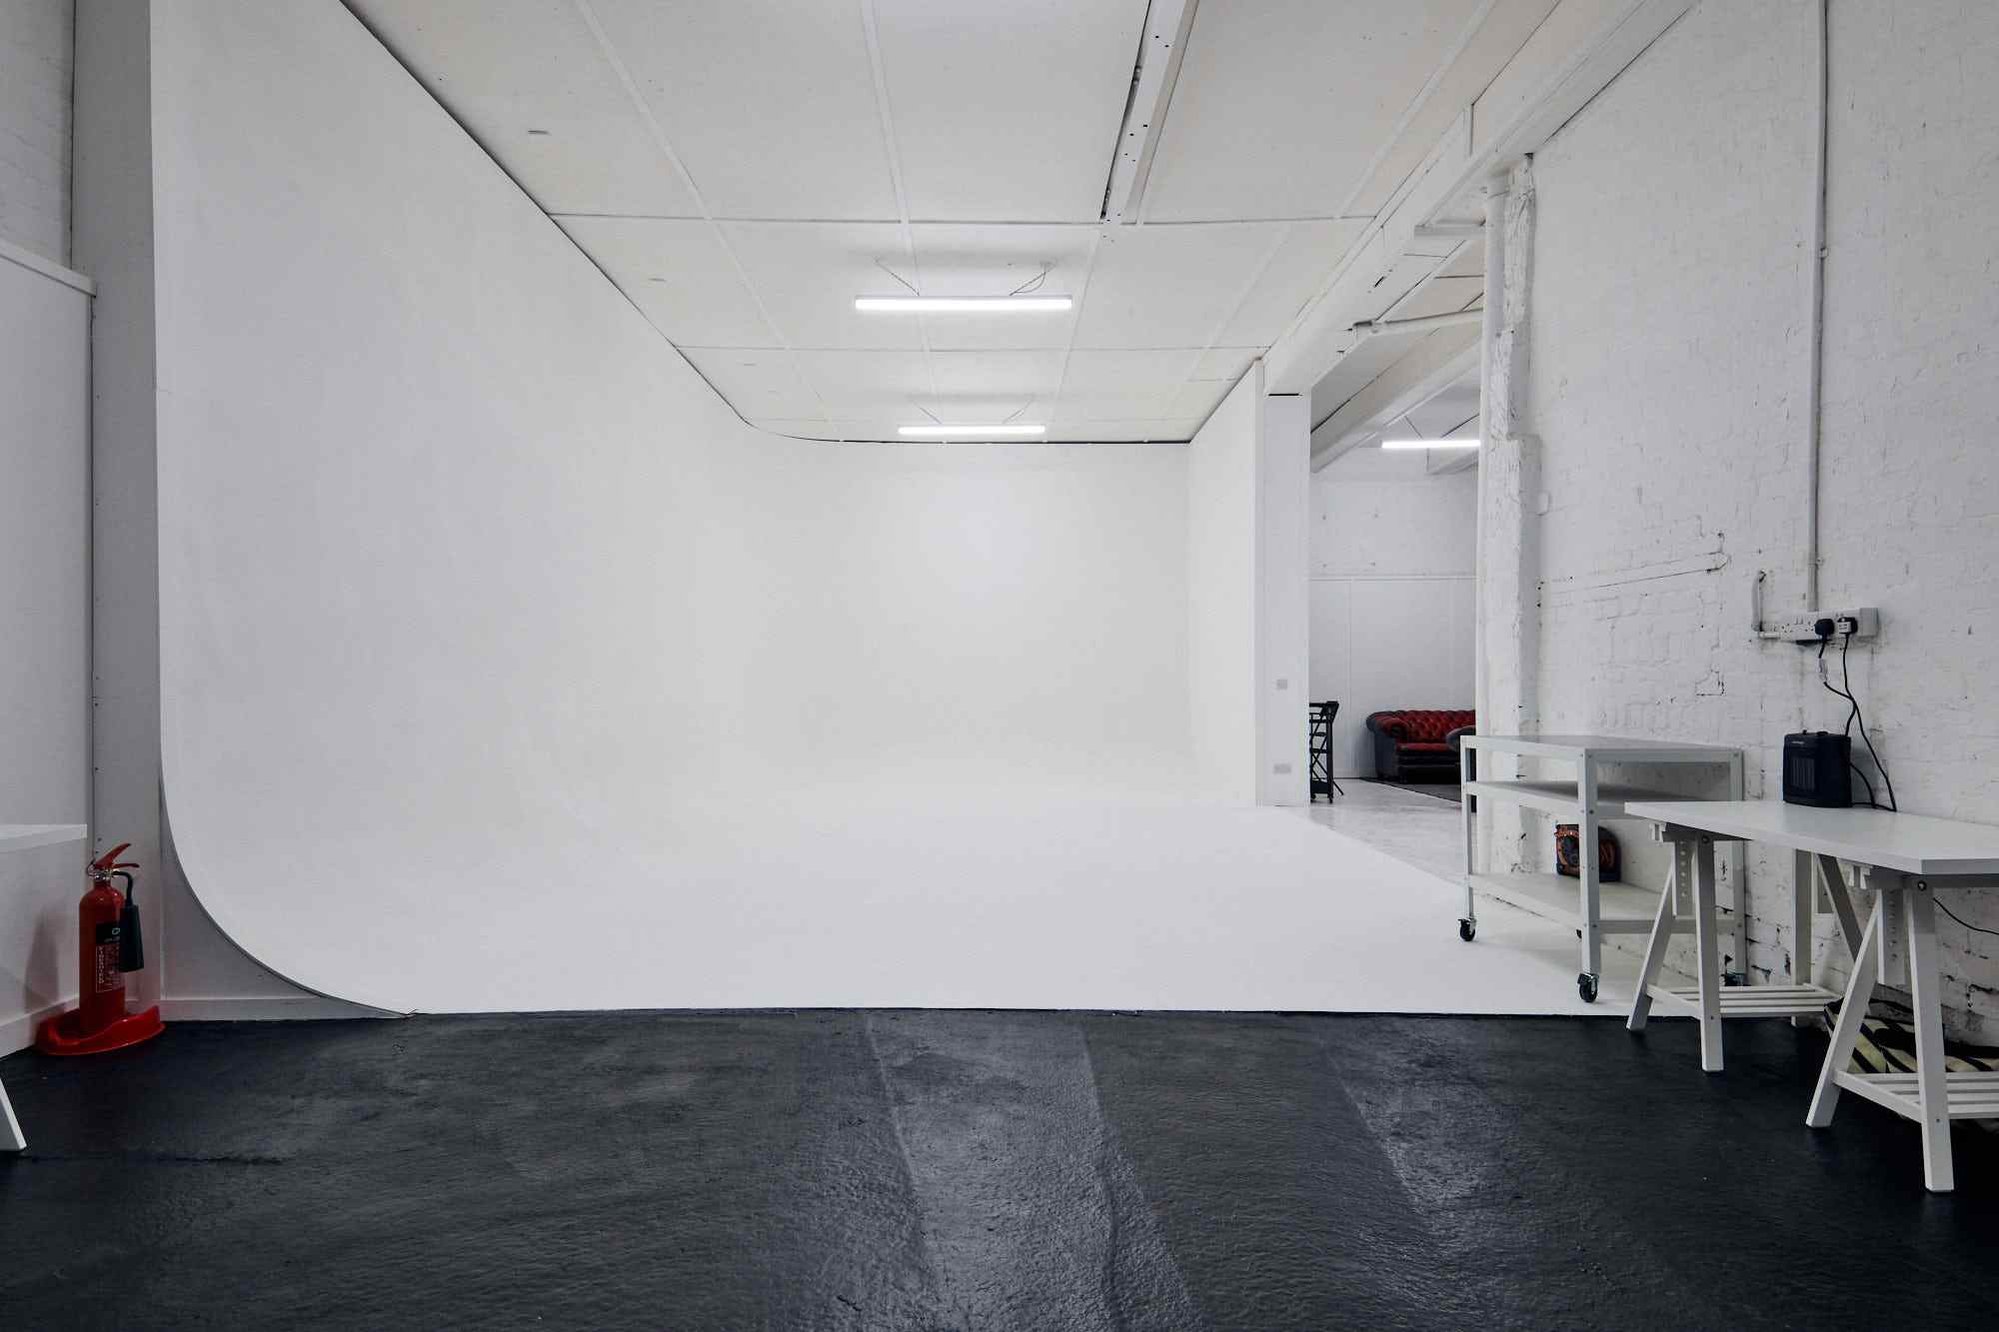 Glasgow photography, tv and film hire studio. infinity cove rental for photo and video in Glasgow. cyc wall with drive in access camera studio govan.